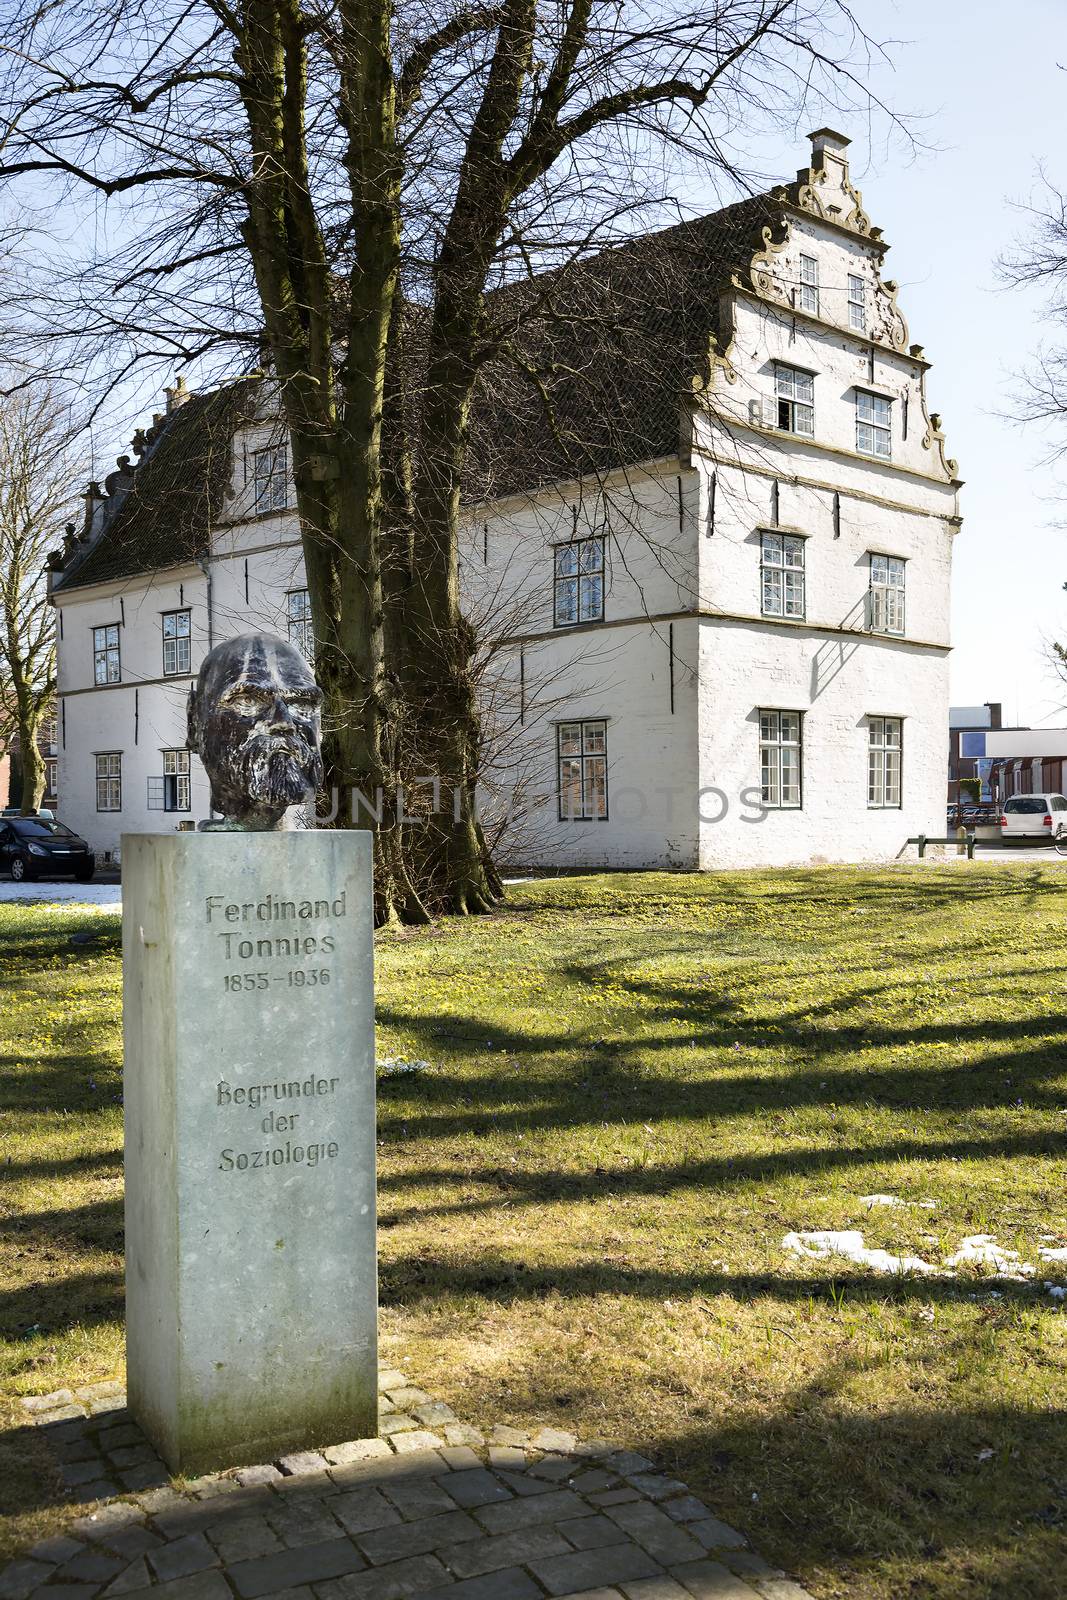 Image of a statue of the founder of sociology and the gatehouse in Husum Northern Germany